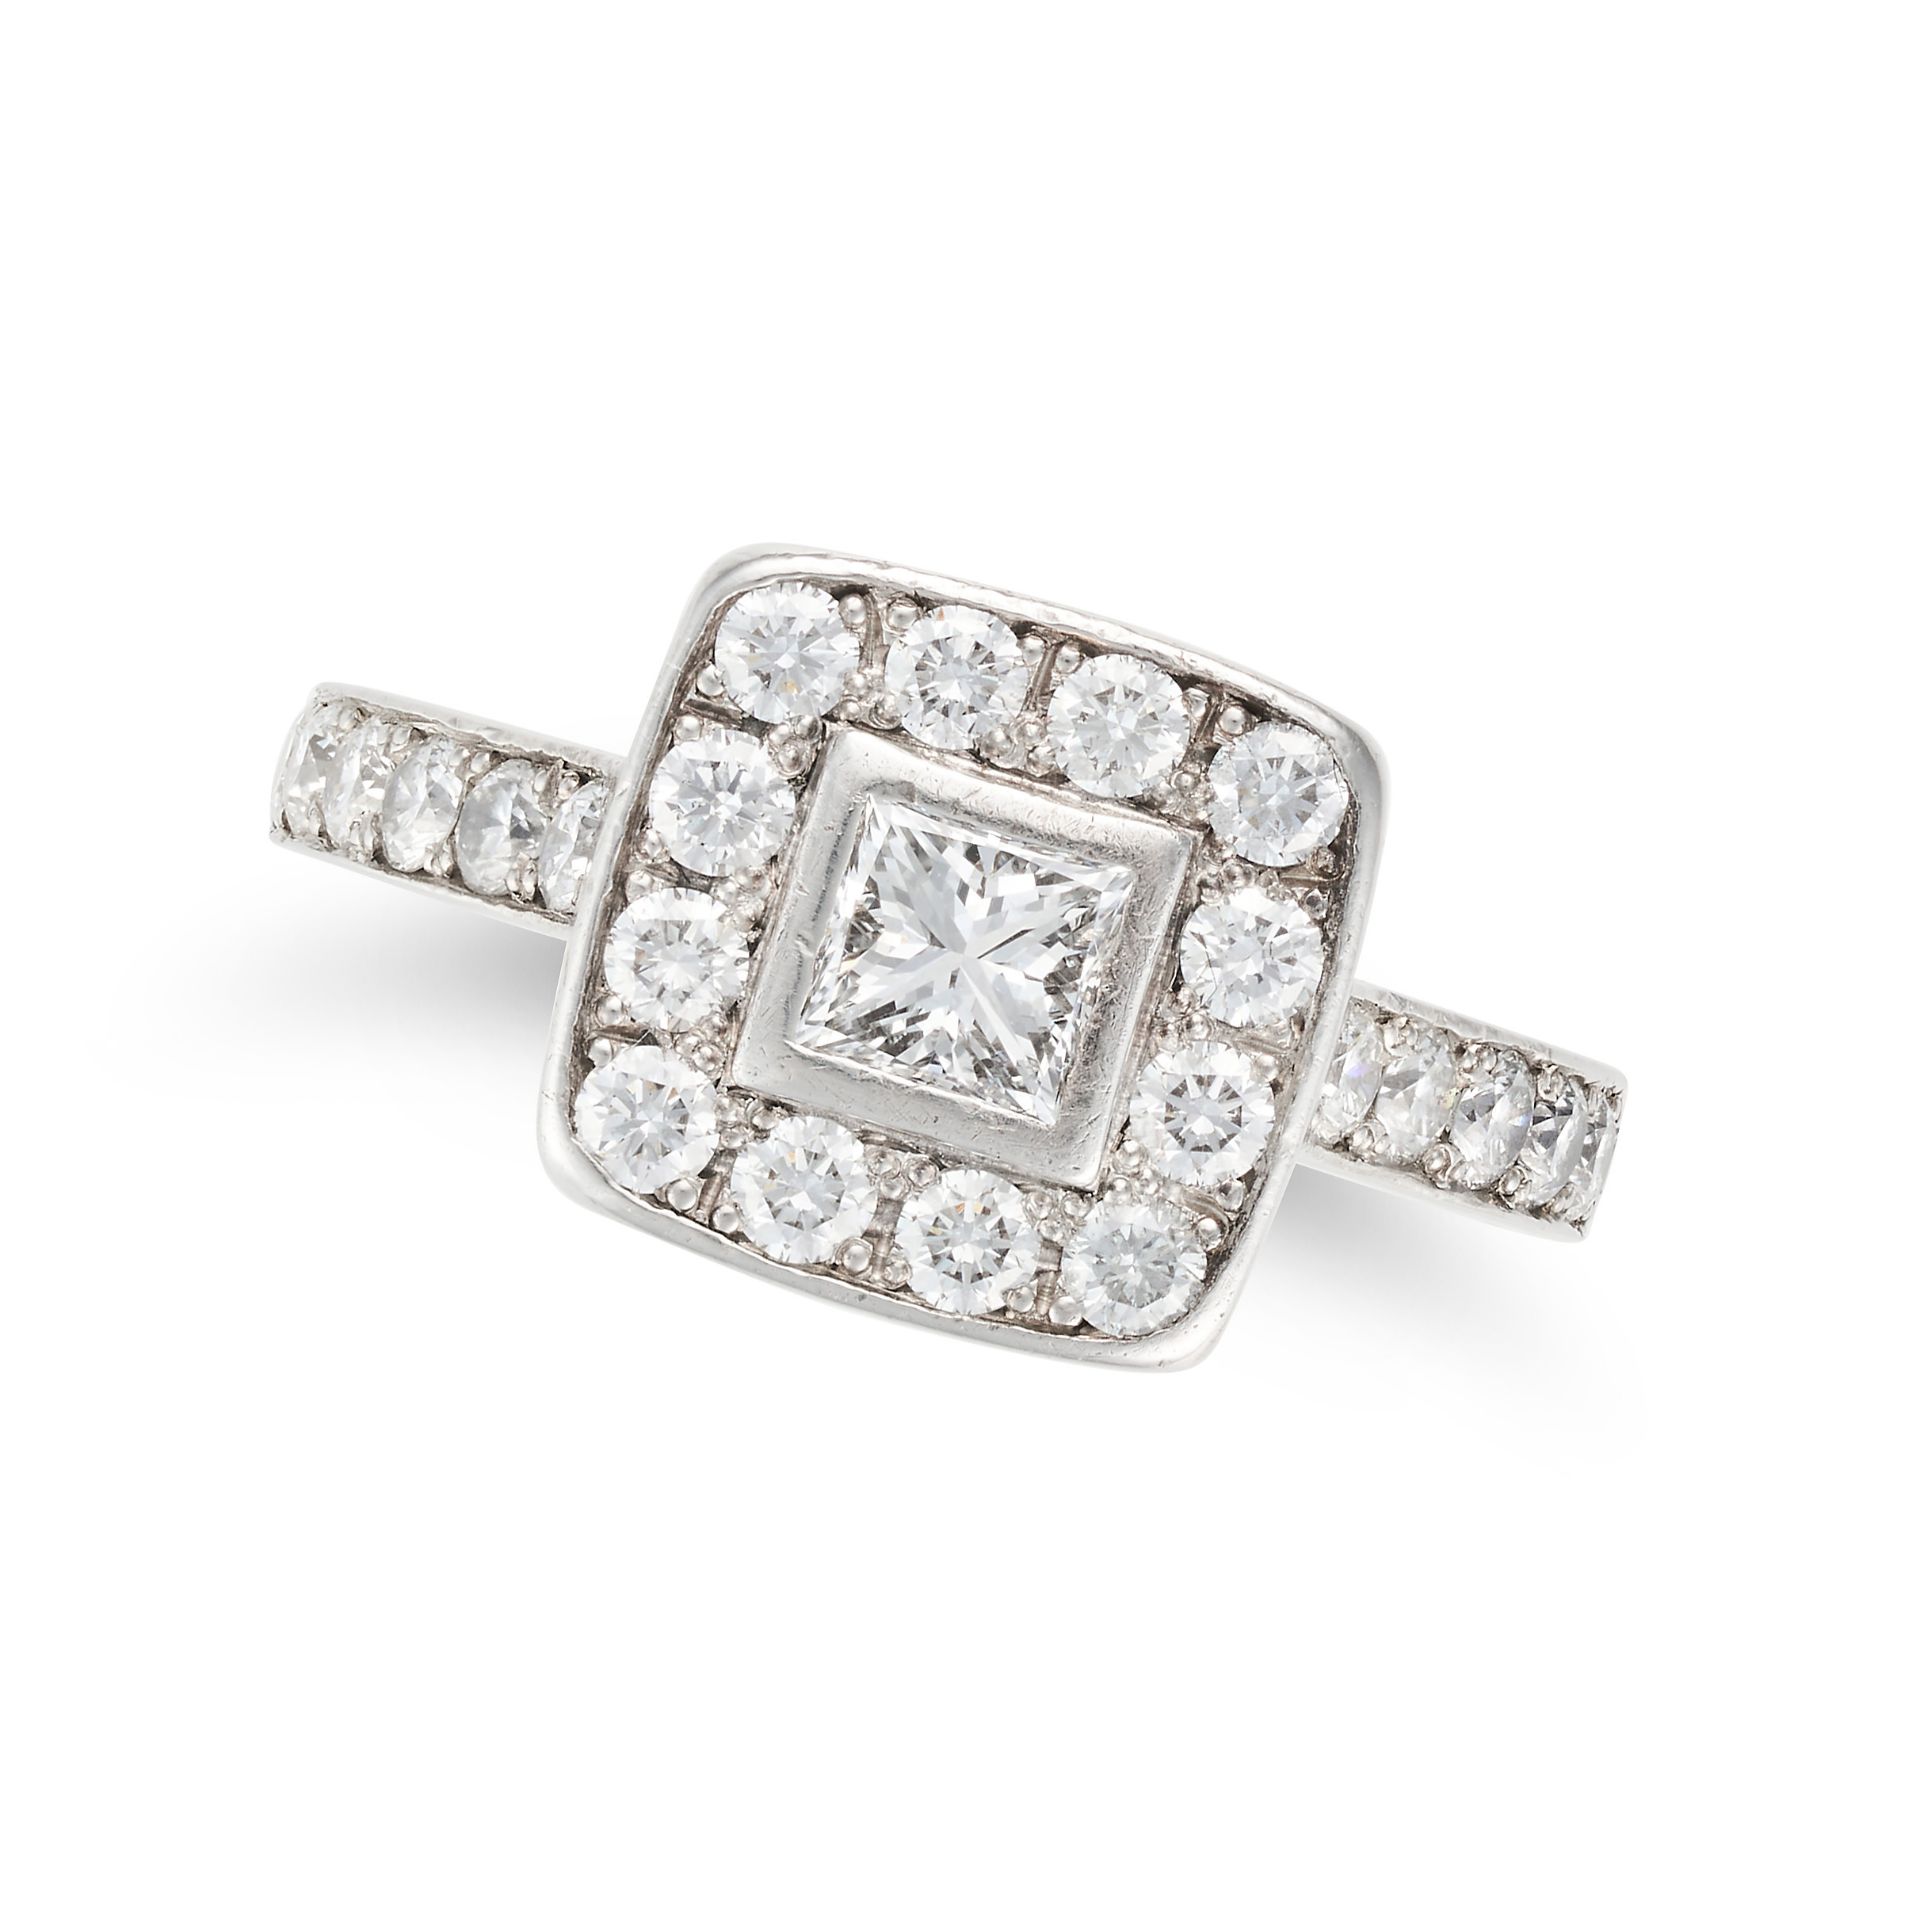 NO RESERVE - A DIAMOND DRESS RING in platinum, set with a princess cut diamond in a border of rou...